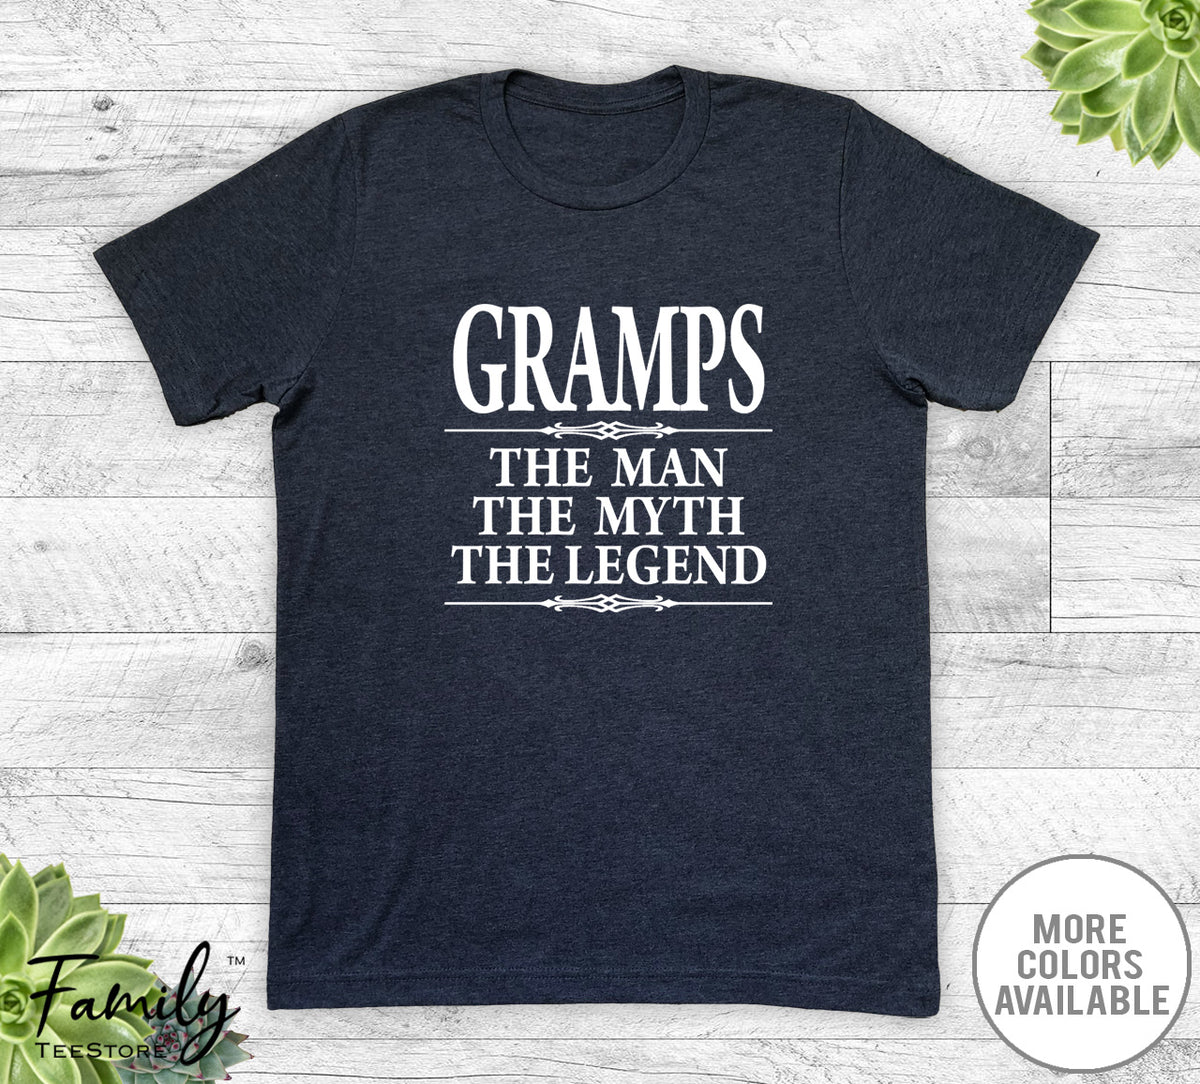 Gramps The Man The Myth The Legend - Unisex T-shirt - Gramps Shirt - Gramps Gift